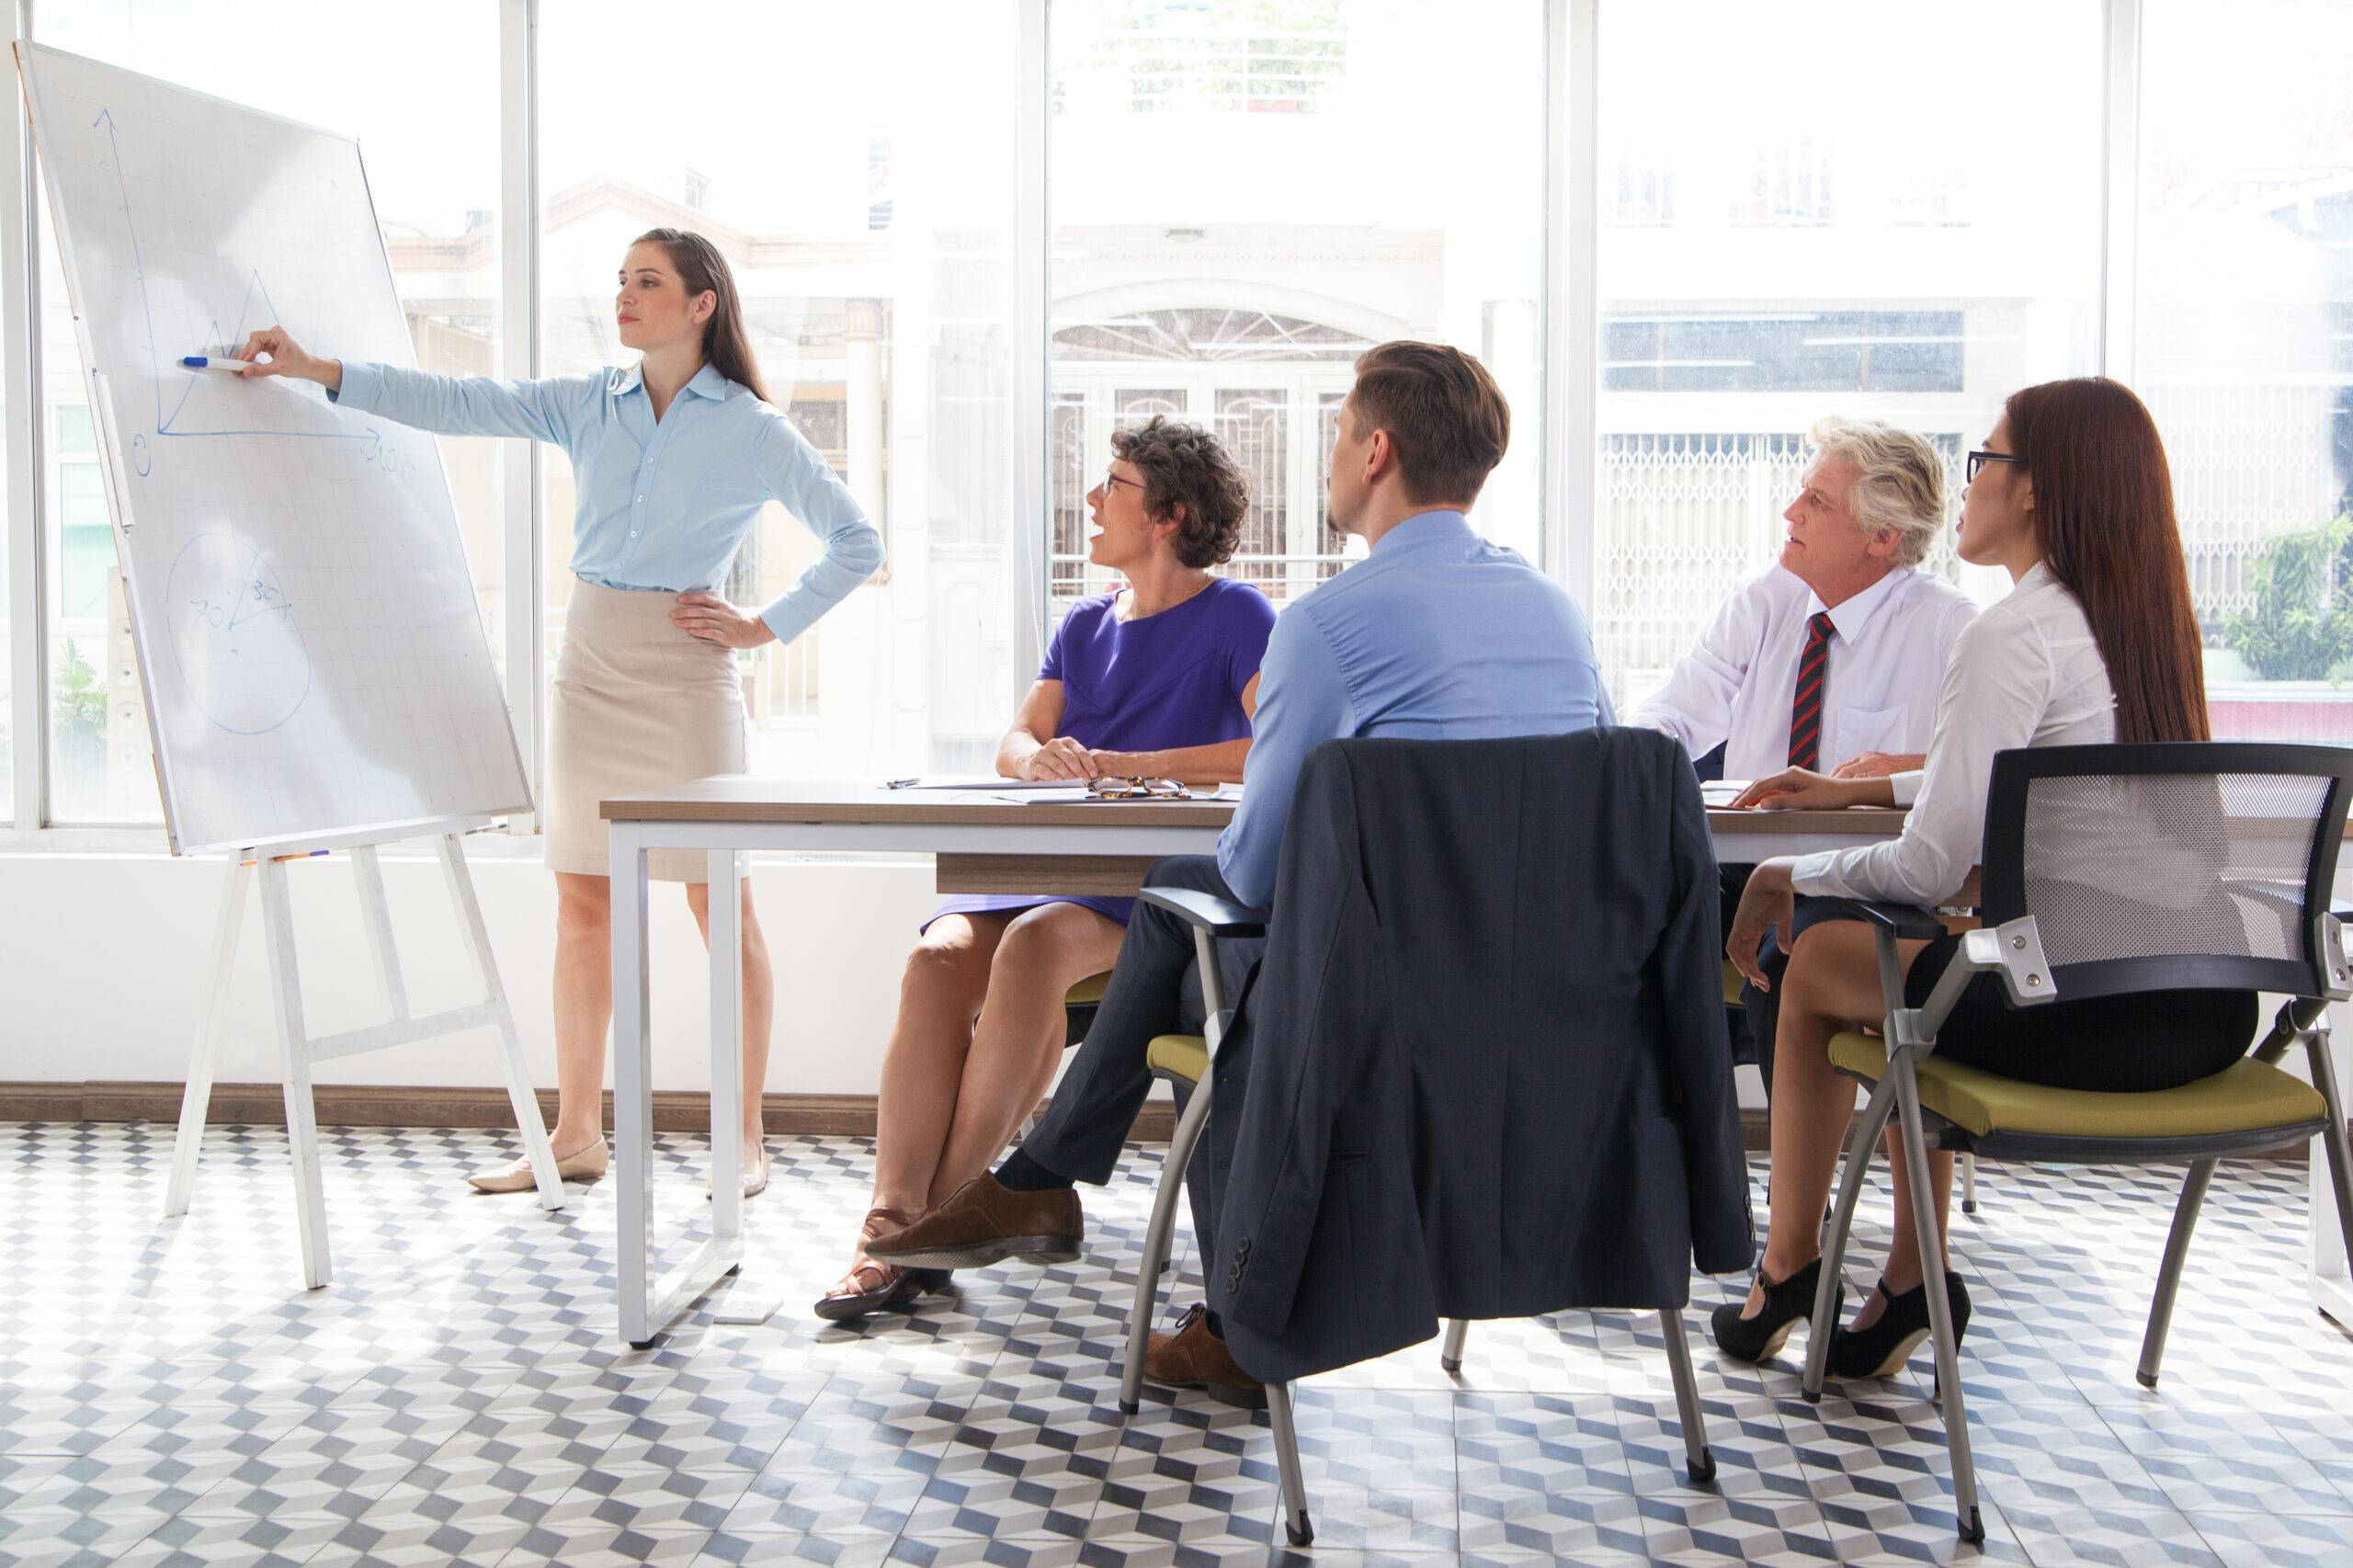 Confident female business coach pointing at whiteboard and explaining graph at meeting, group of four people listening to her. They sitting in conference room. Business training or education concept